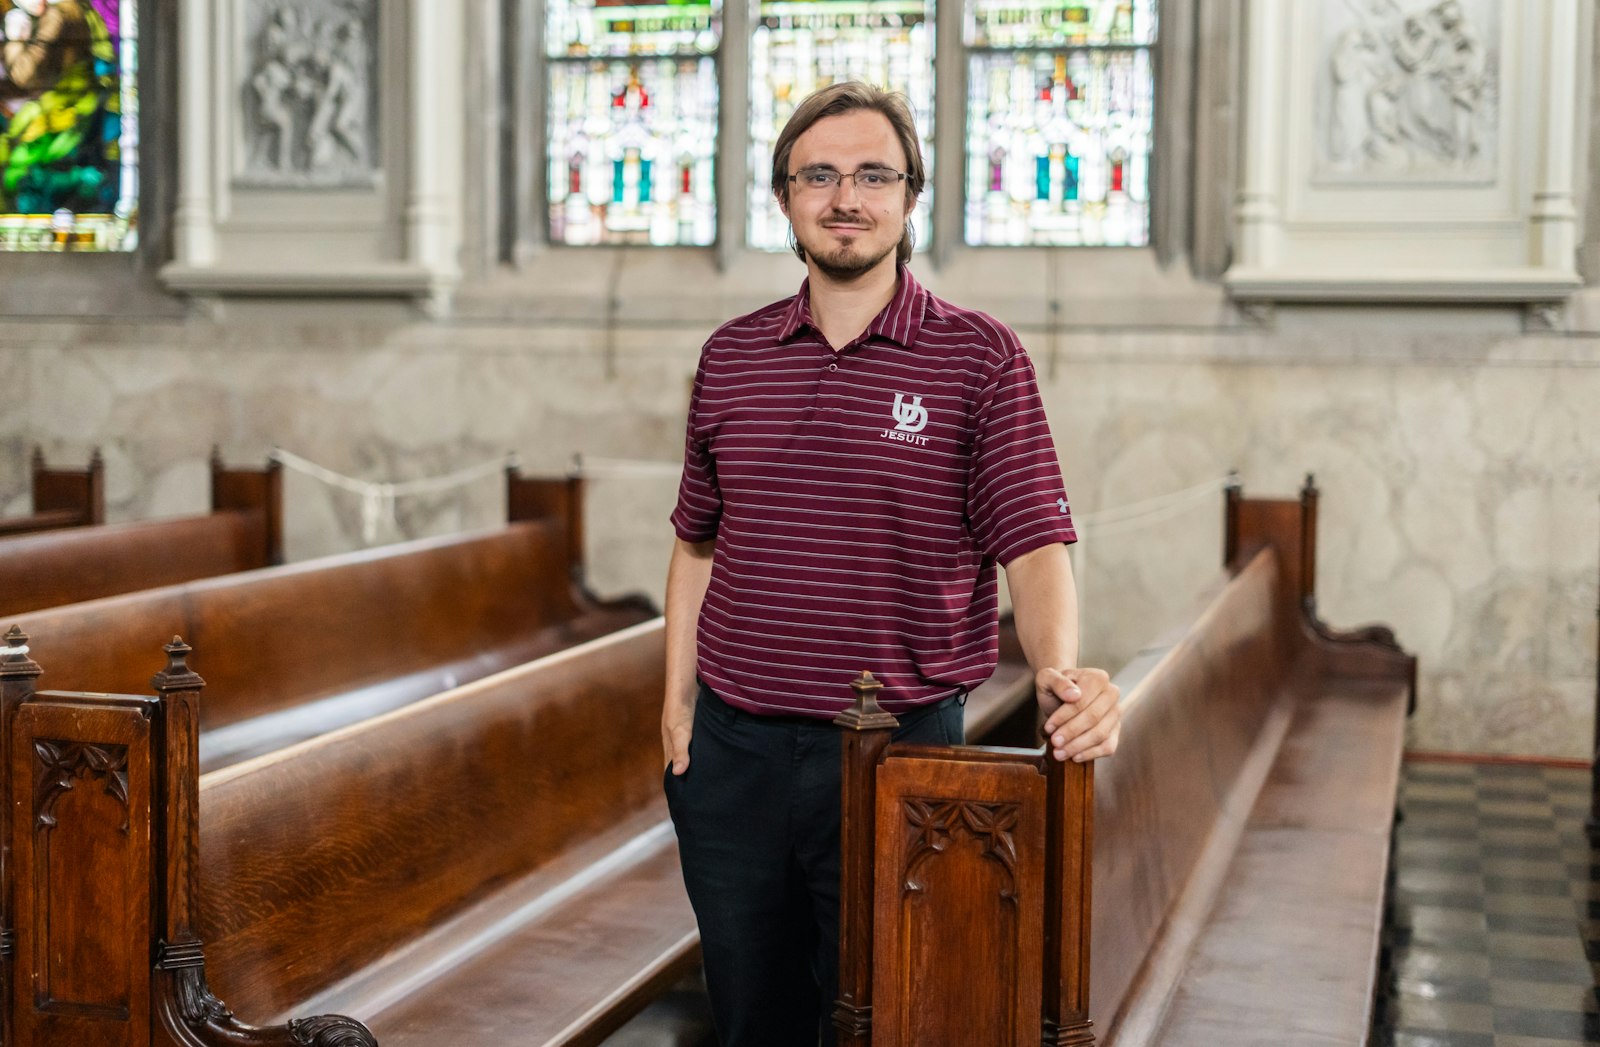 Although not everyone will complete a pilgrimage to nearly 300 churches, Schuelke said he encourages Catholics to experience Mass at different parishes from time to time, in order to gain an appreciation for the Church's universal beauty.